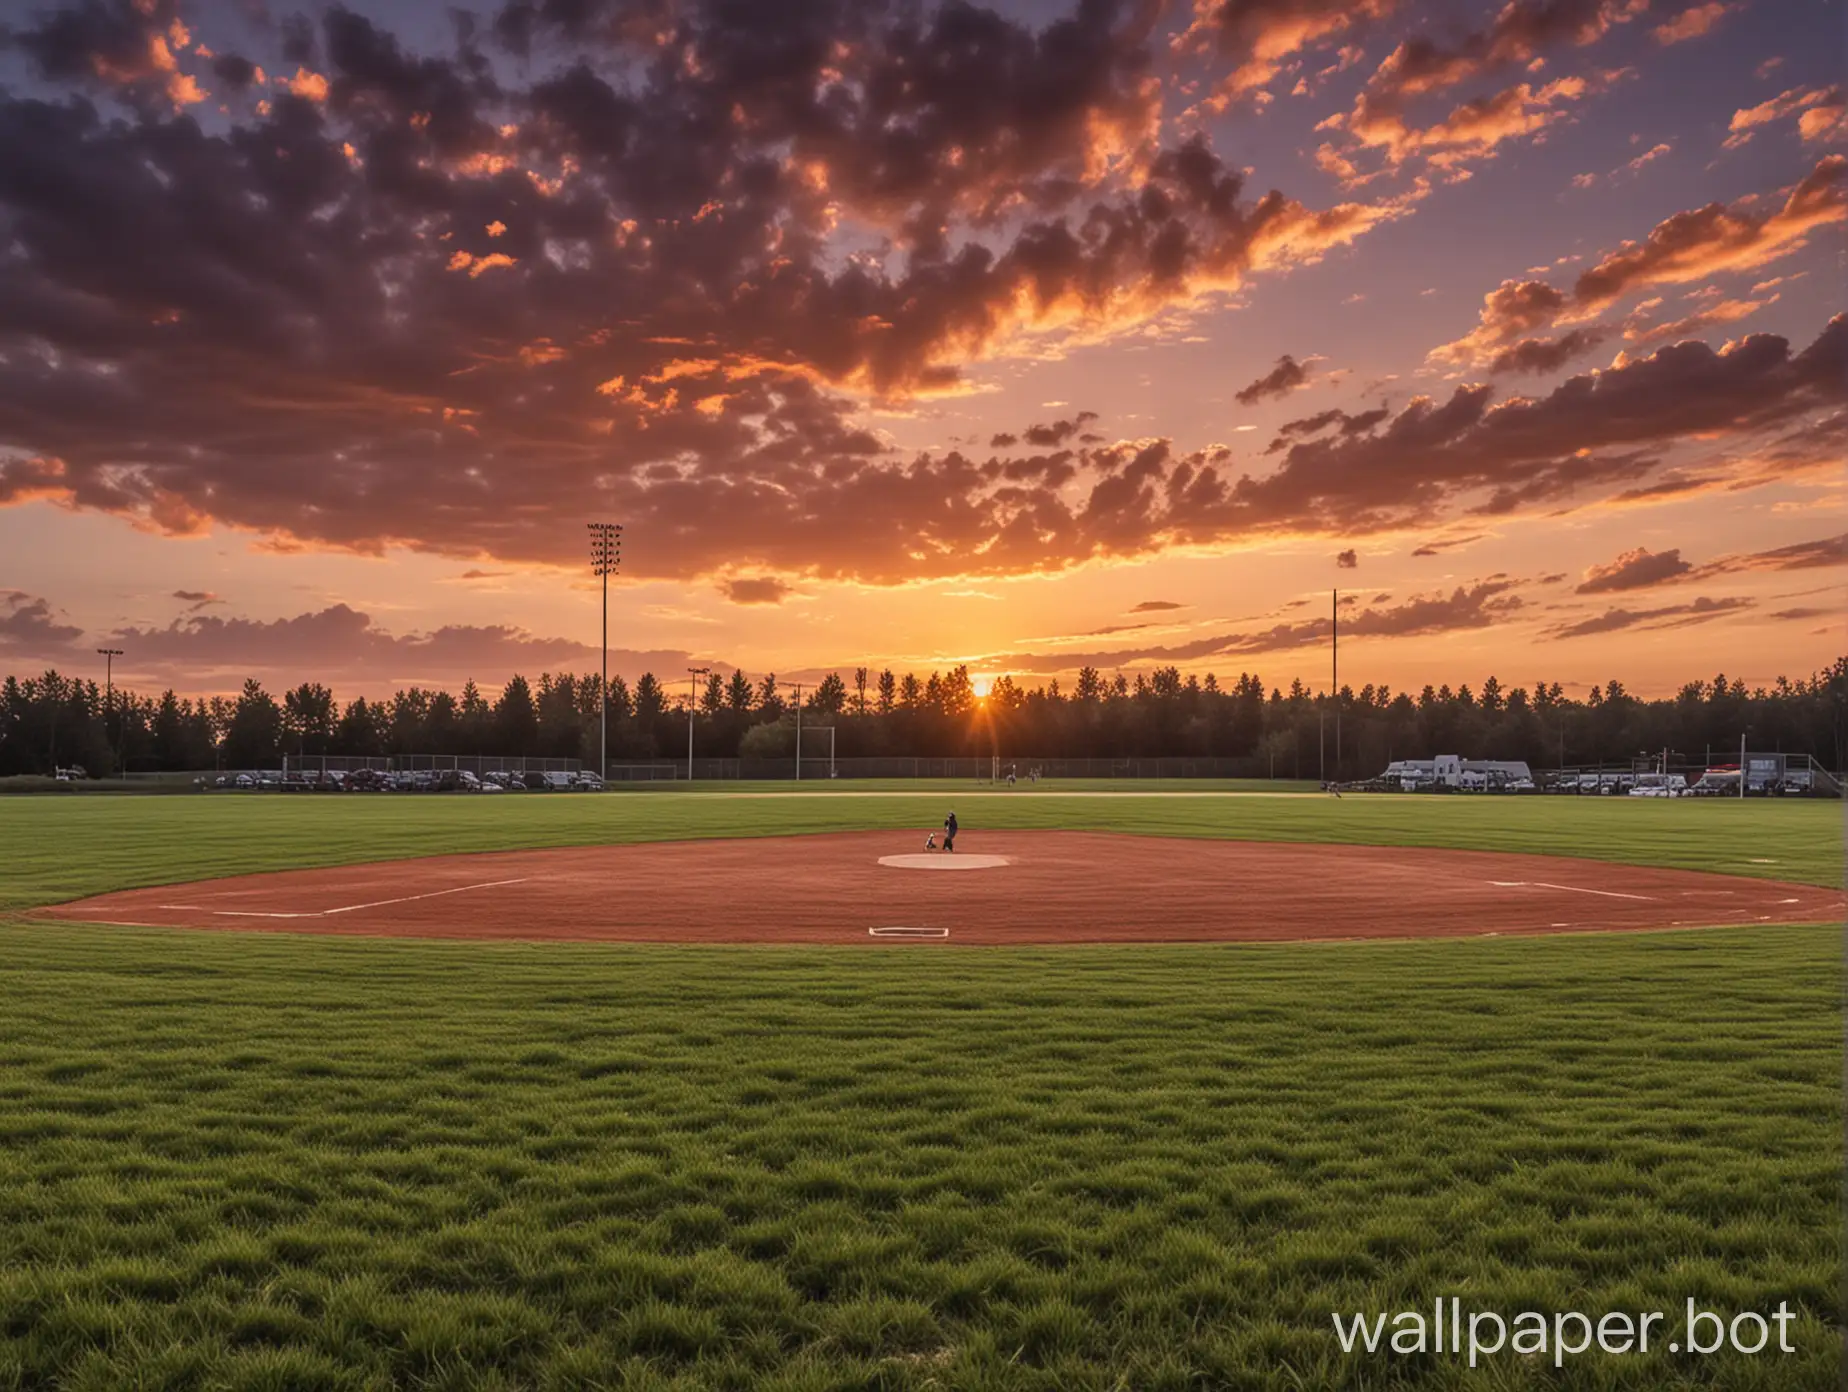 field of dreams baseball field during a sunset.